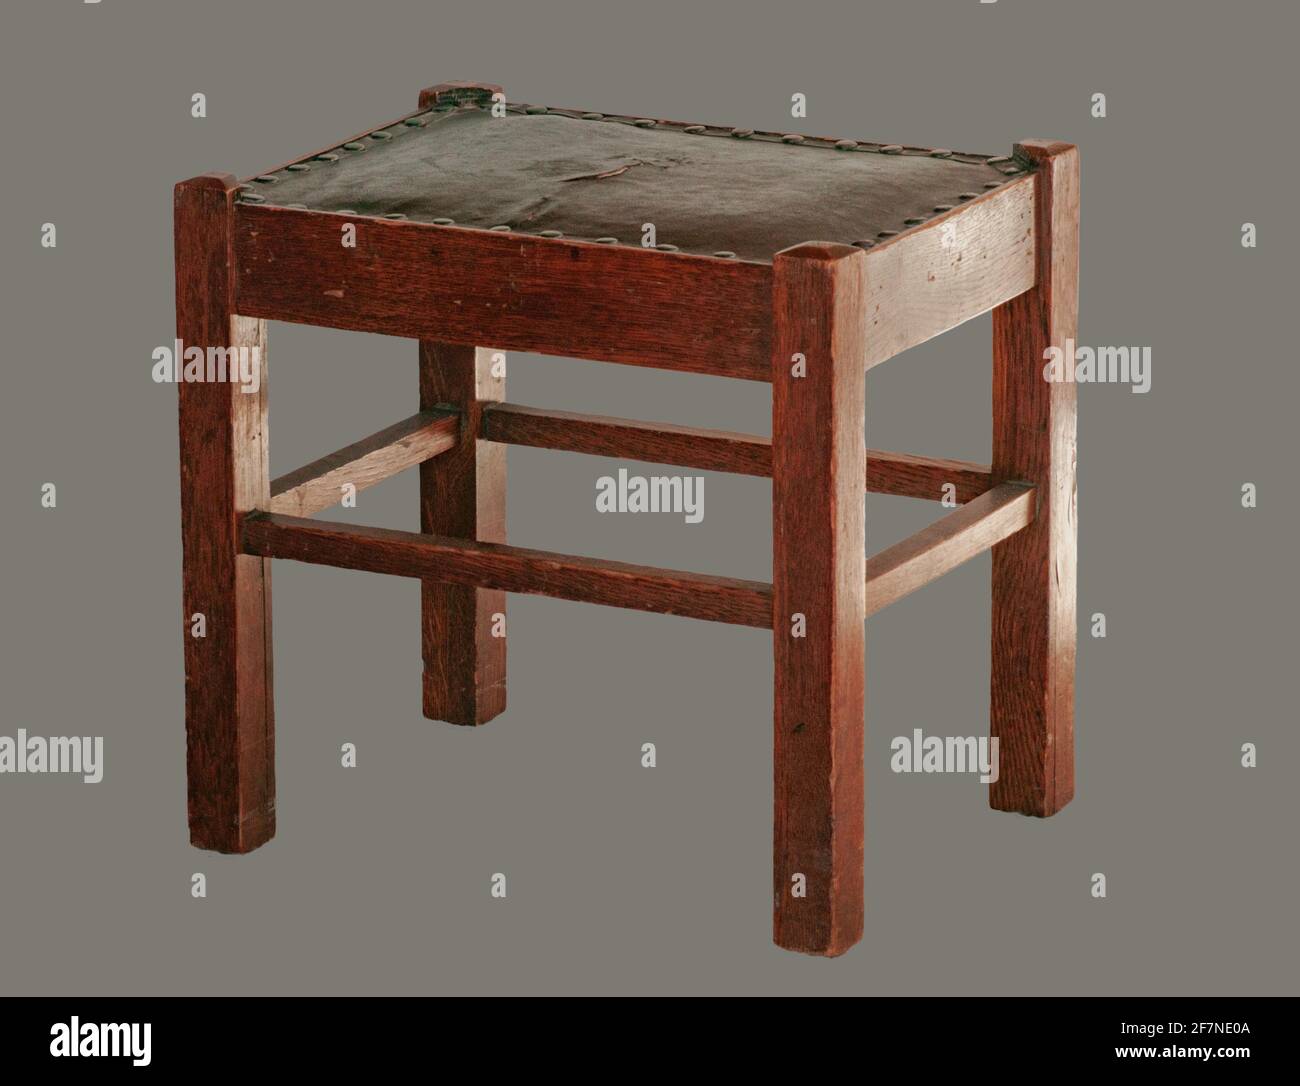 Arts & Crafts Mission Style Craftsman footstool for DIY repair upholstery. Old antique furniture to refurbish and refinish.Isolated. Stock Photo